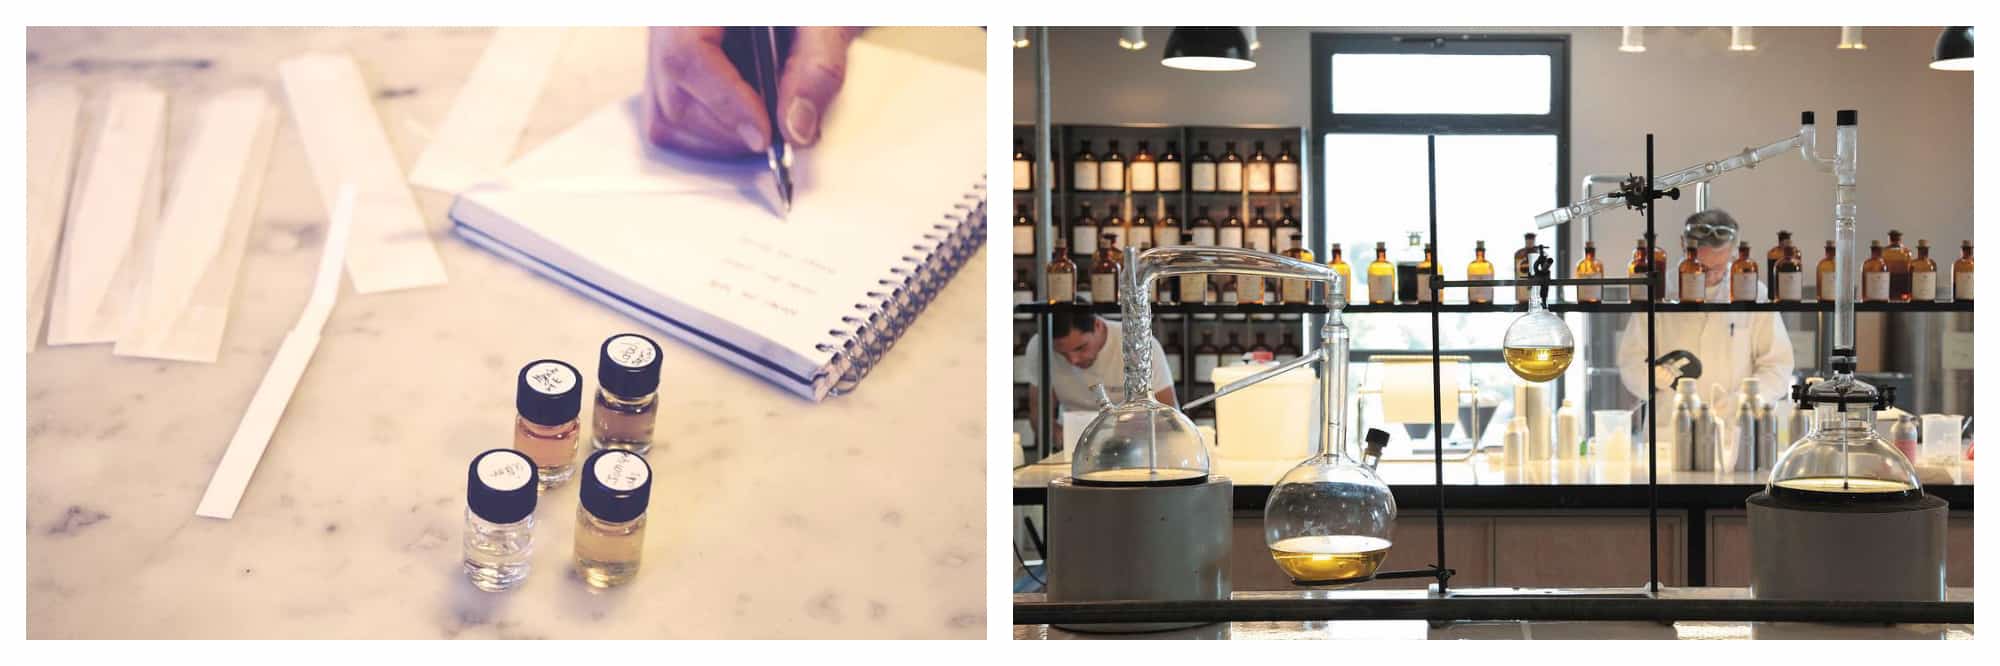 On left: After testing four different perfumes, a participate takes down notes at a workshop run by Rendez-Vous Parfum, a Paris-based company specializing in perfume walks, workshops, and sensory events. On right: Two perfumers carefully mixing scents in the workshop of Fragonard, a family-owned Paris perfumery, which also runs the Musée du Parfum in Paris. 